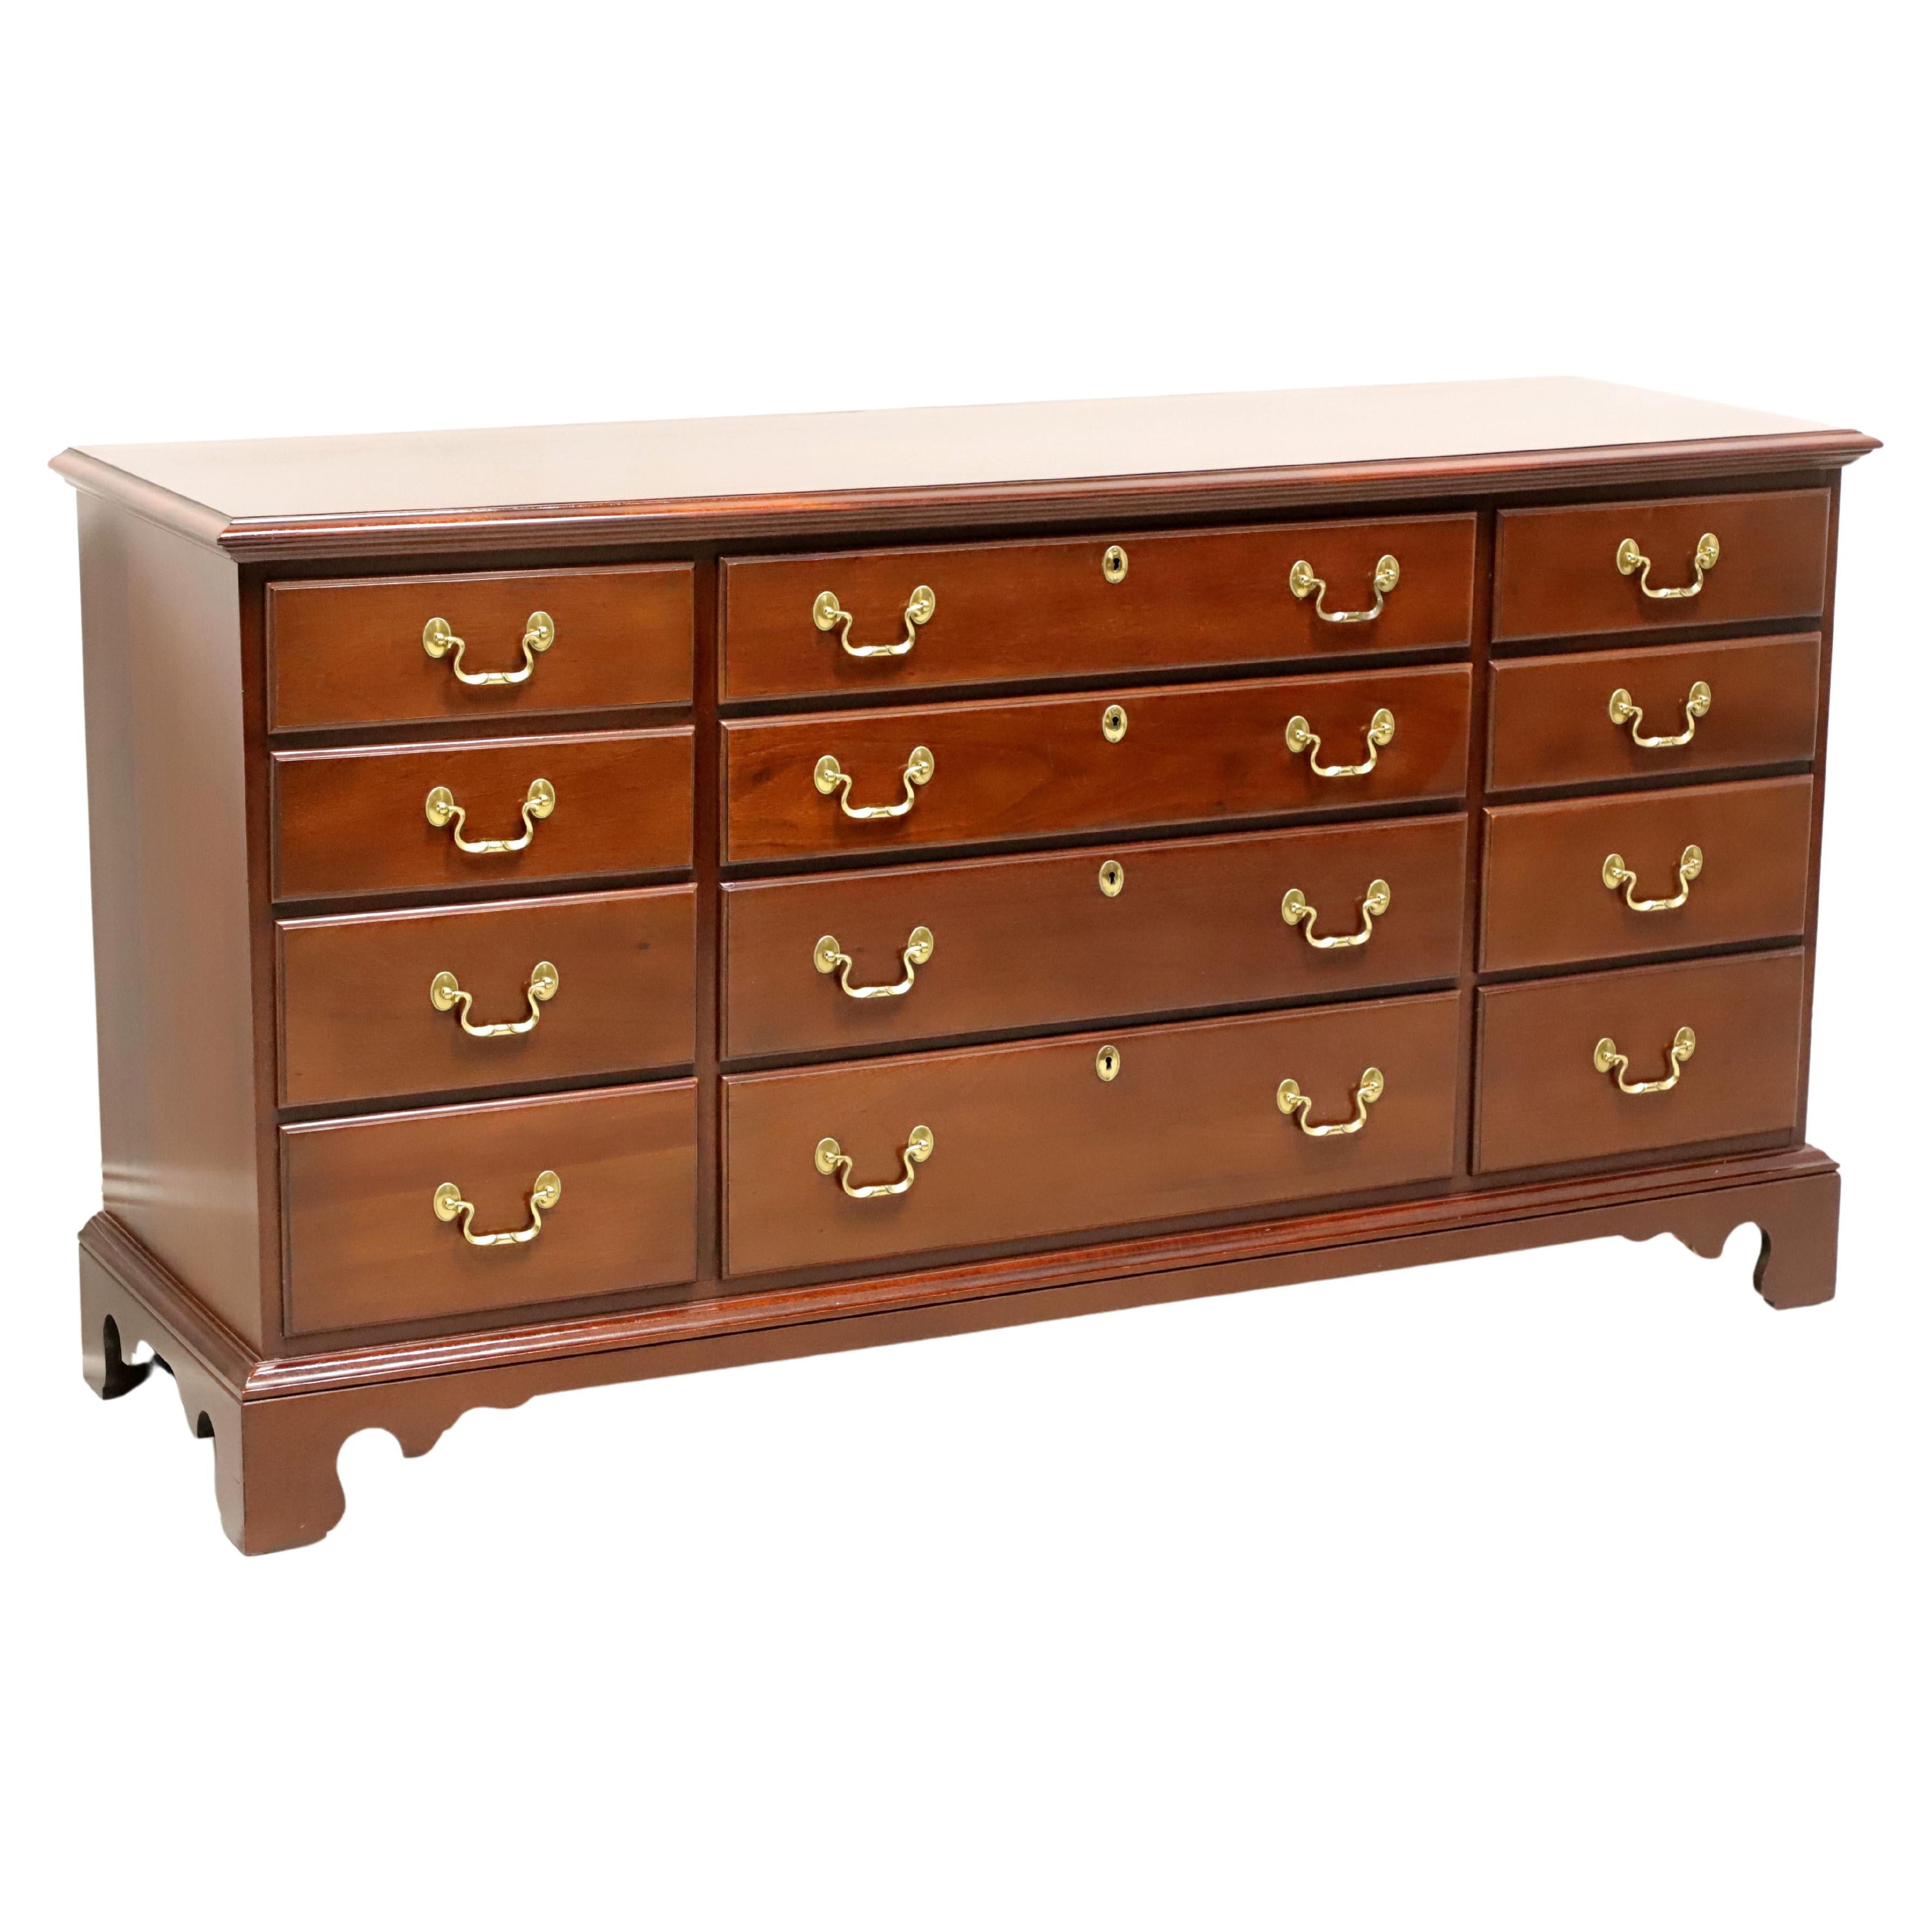 LINK-TAYLOR Heirloom Beaufort Solid Mahogany Chippendale Triple Dresser - A For Sale